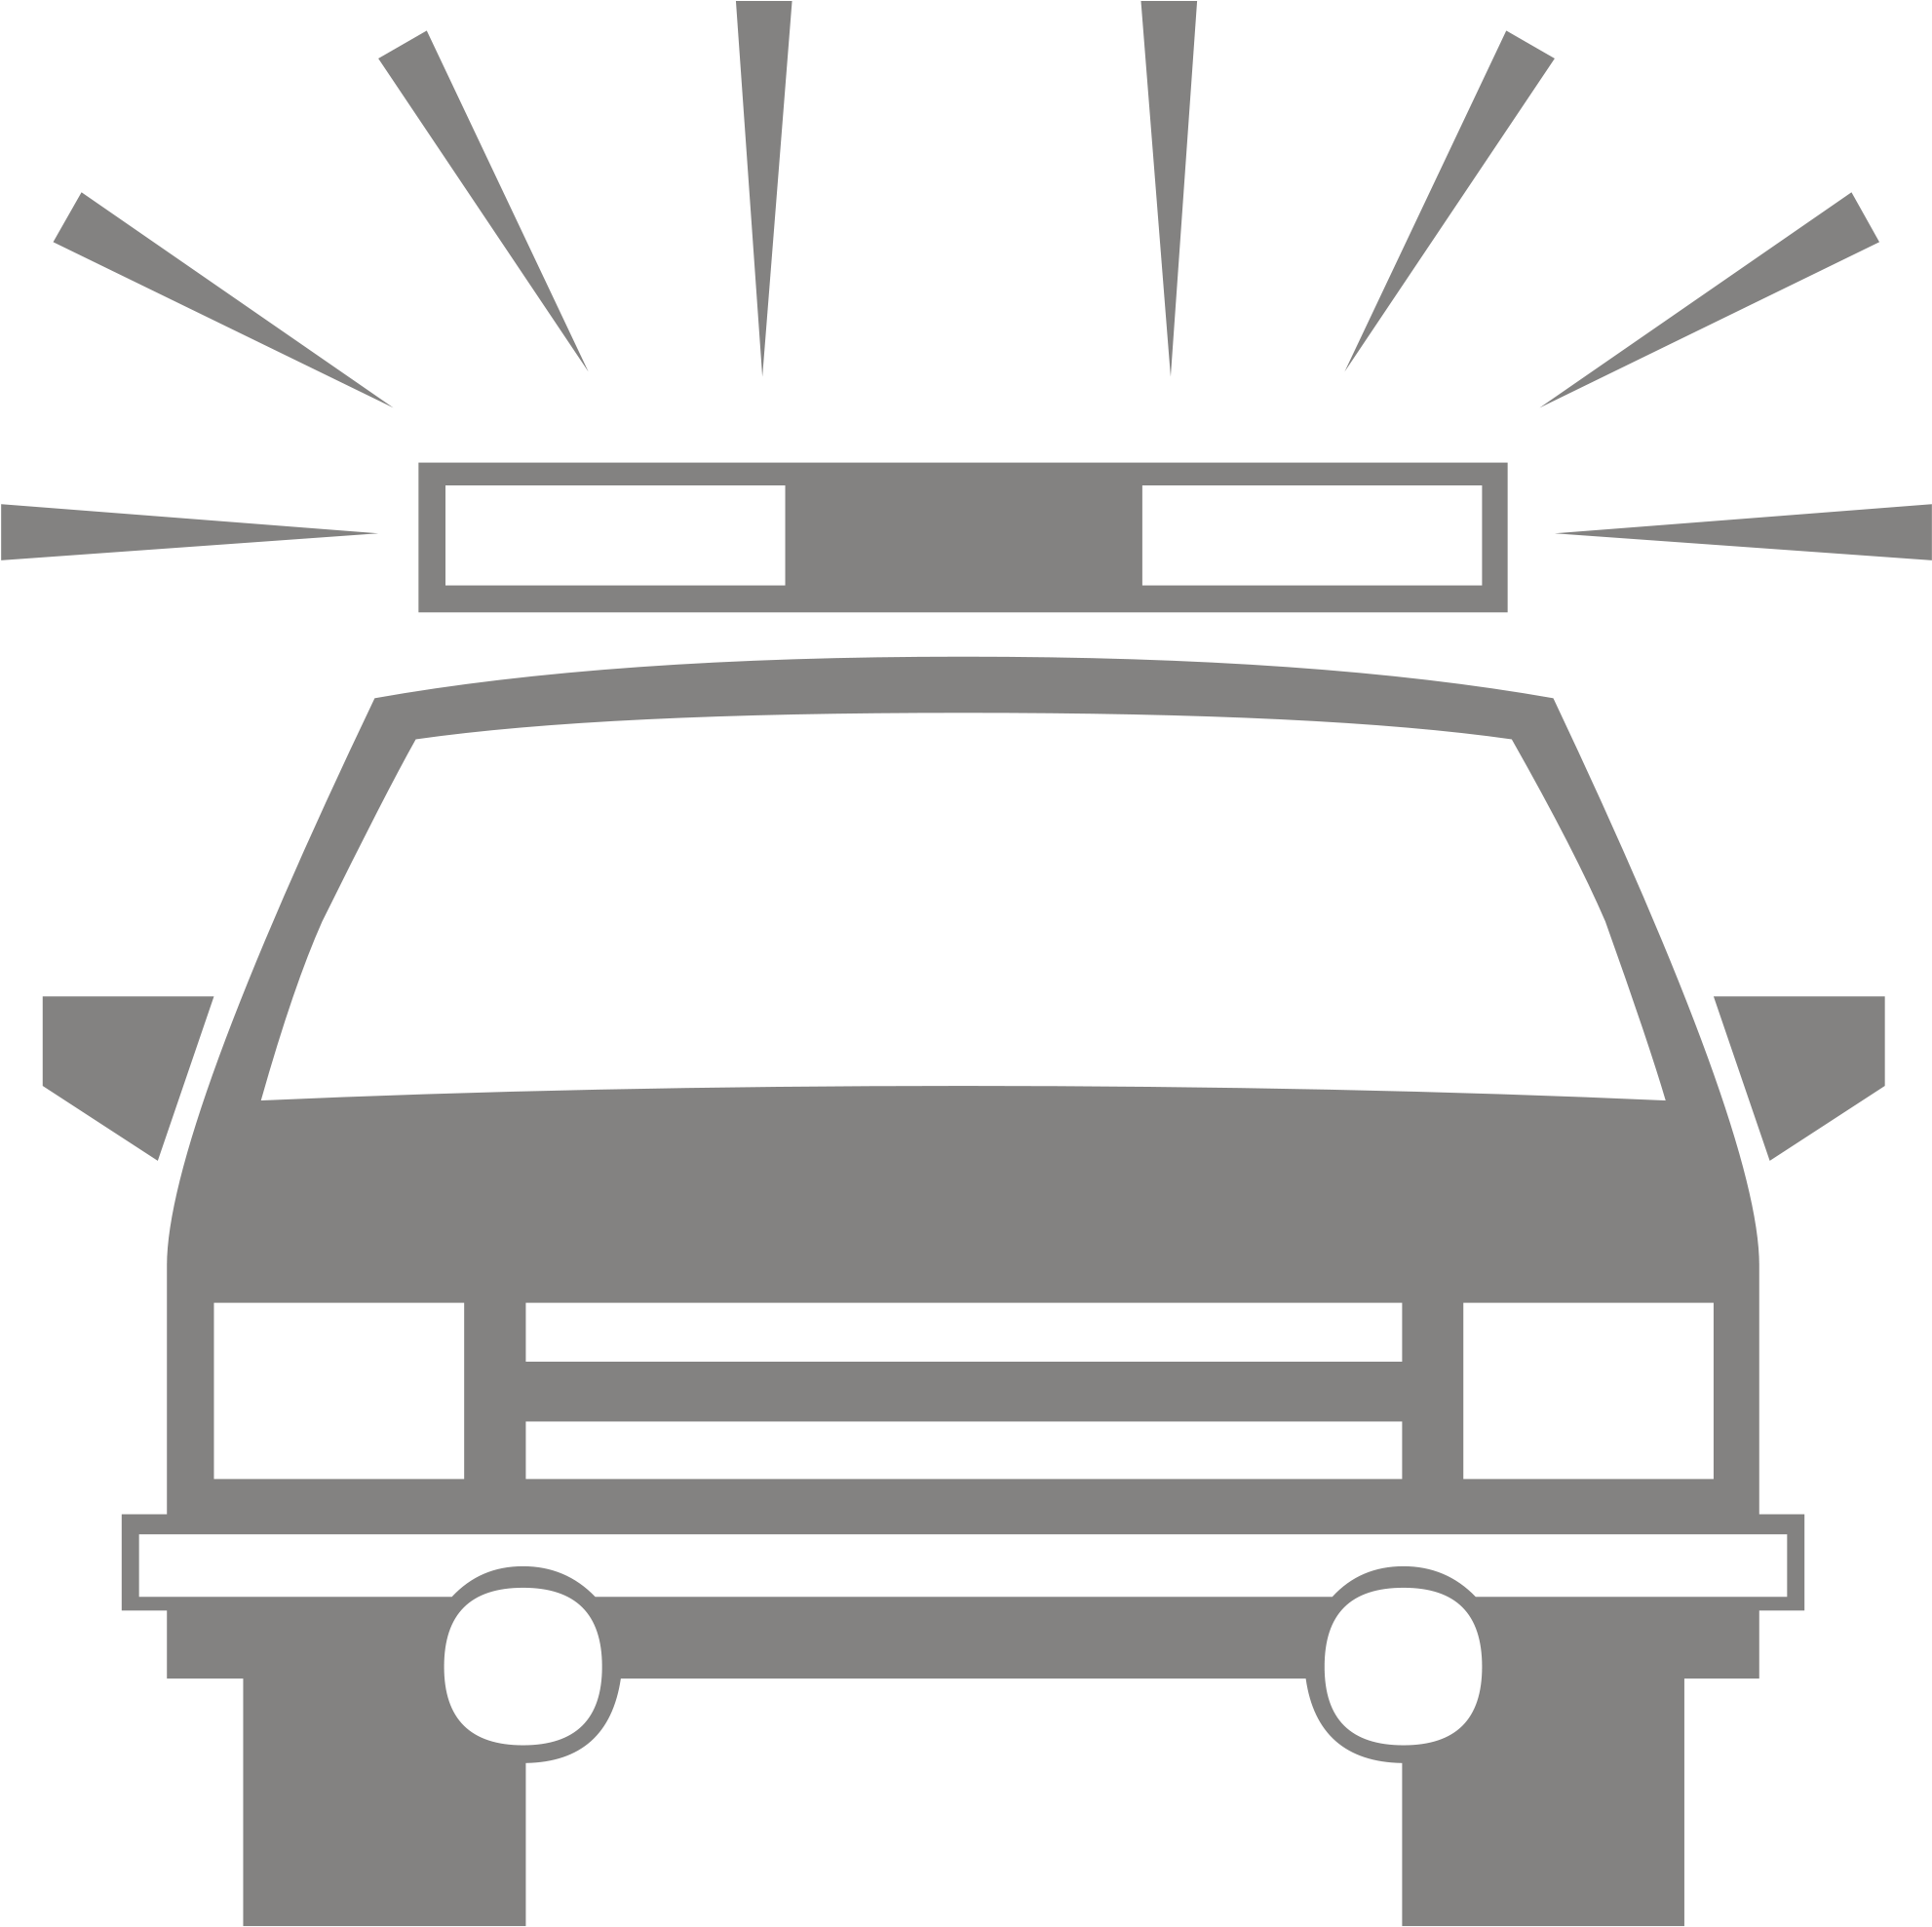 Police Car Silhouette Icon - Police Car Silhouette (2000x2000)